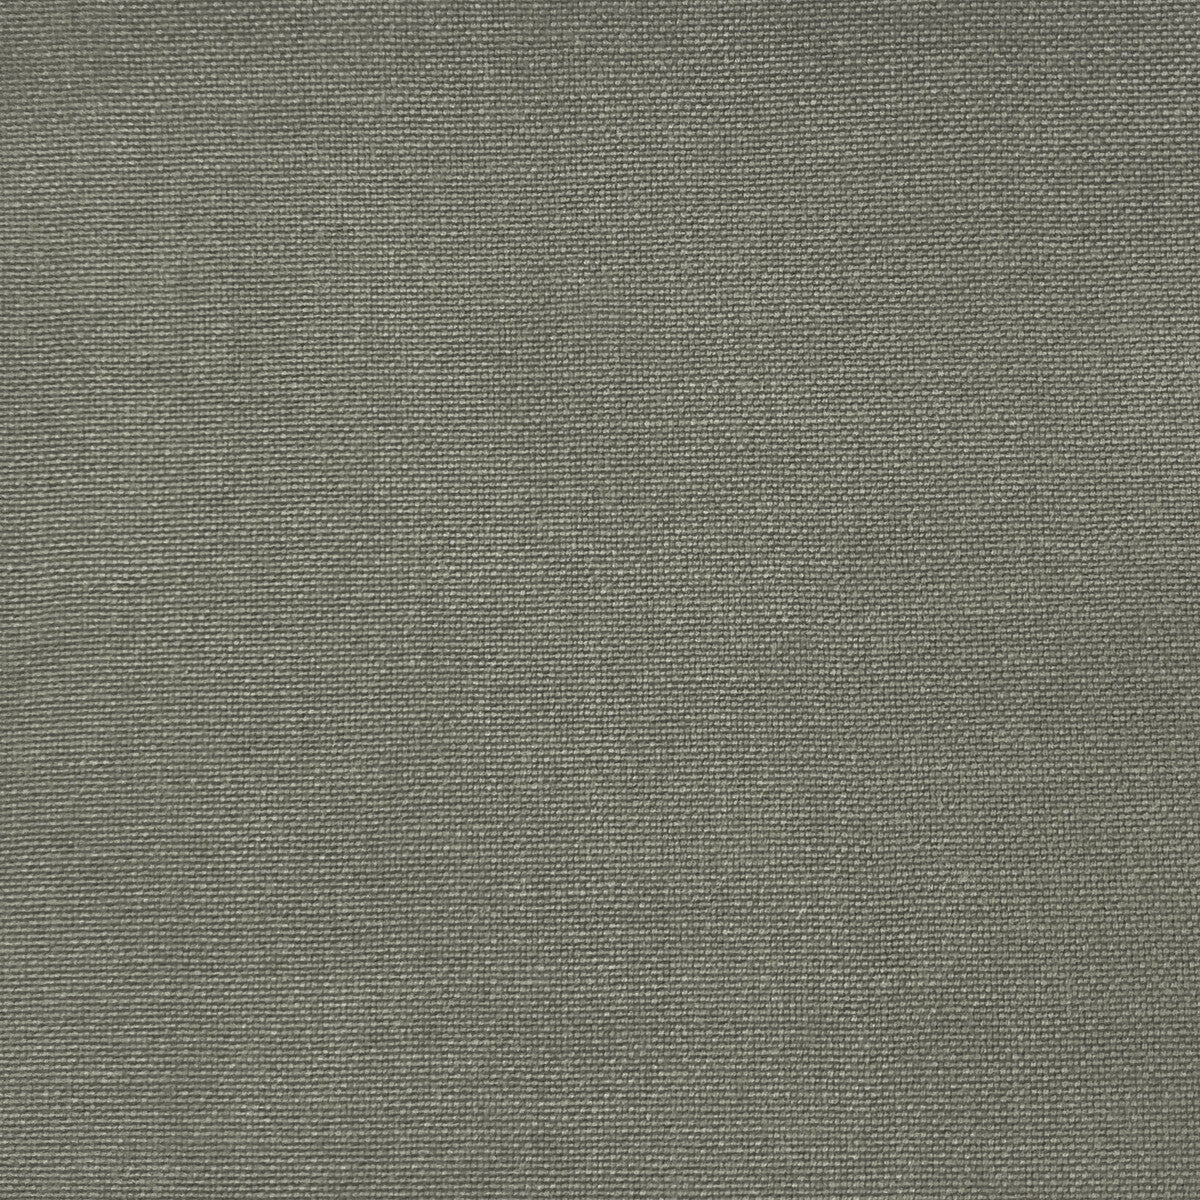 Palma fabric in gris color - pattern GDT5688.077.0 - by Gaston y Daniela in the Gaston Maiorica collection